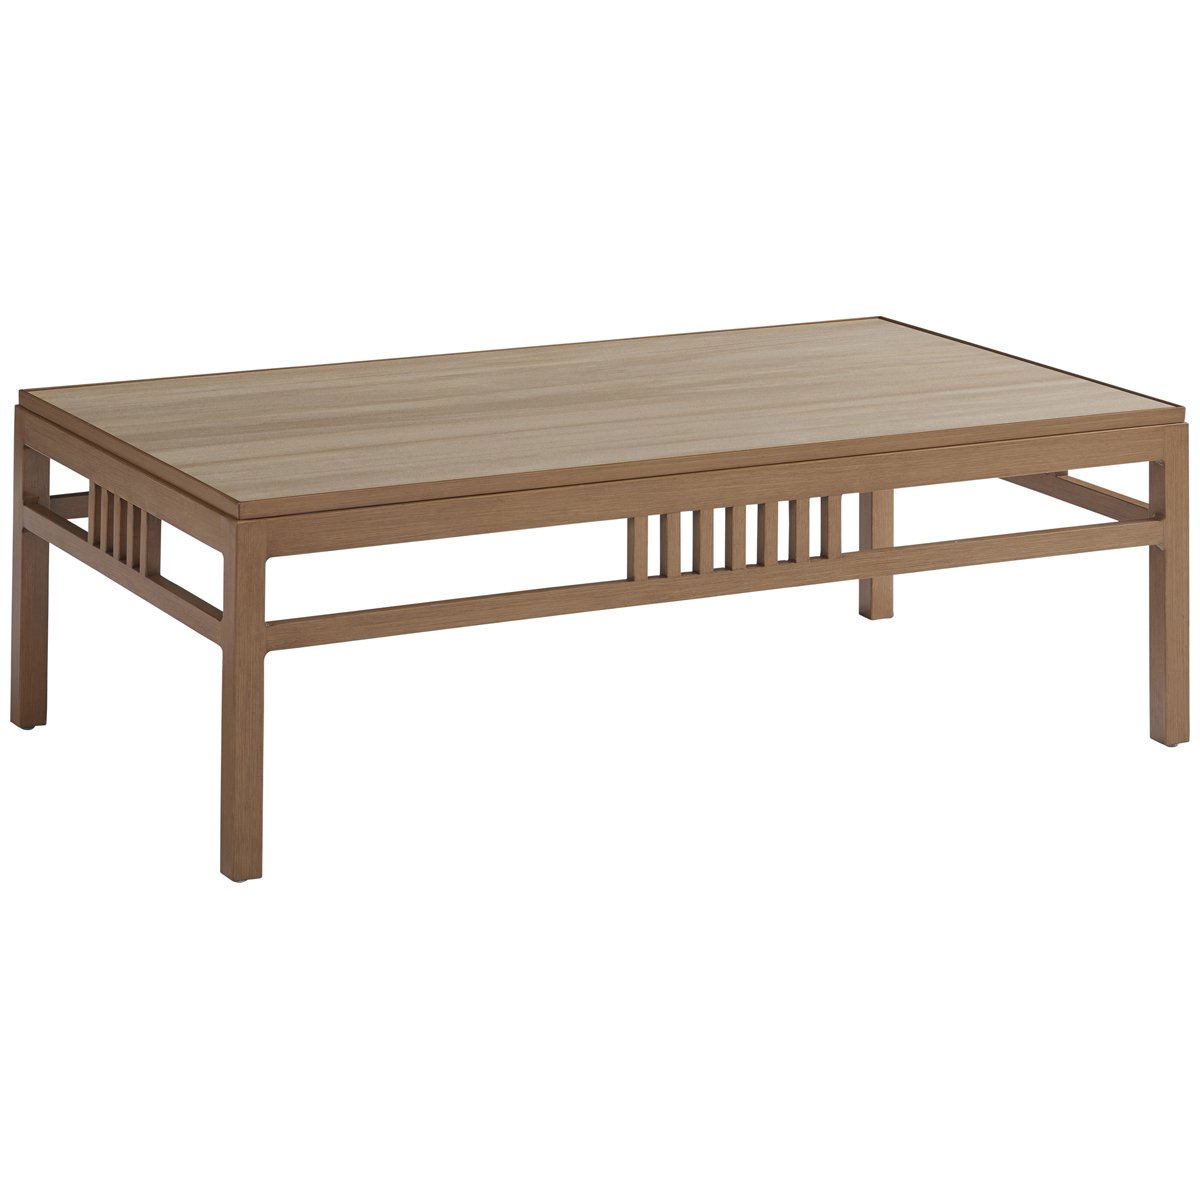 Tommy Bahama St Tropez Rectangular Outdoor Cocktail Table